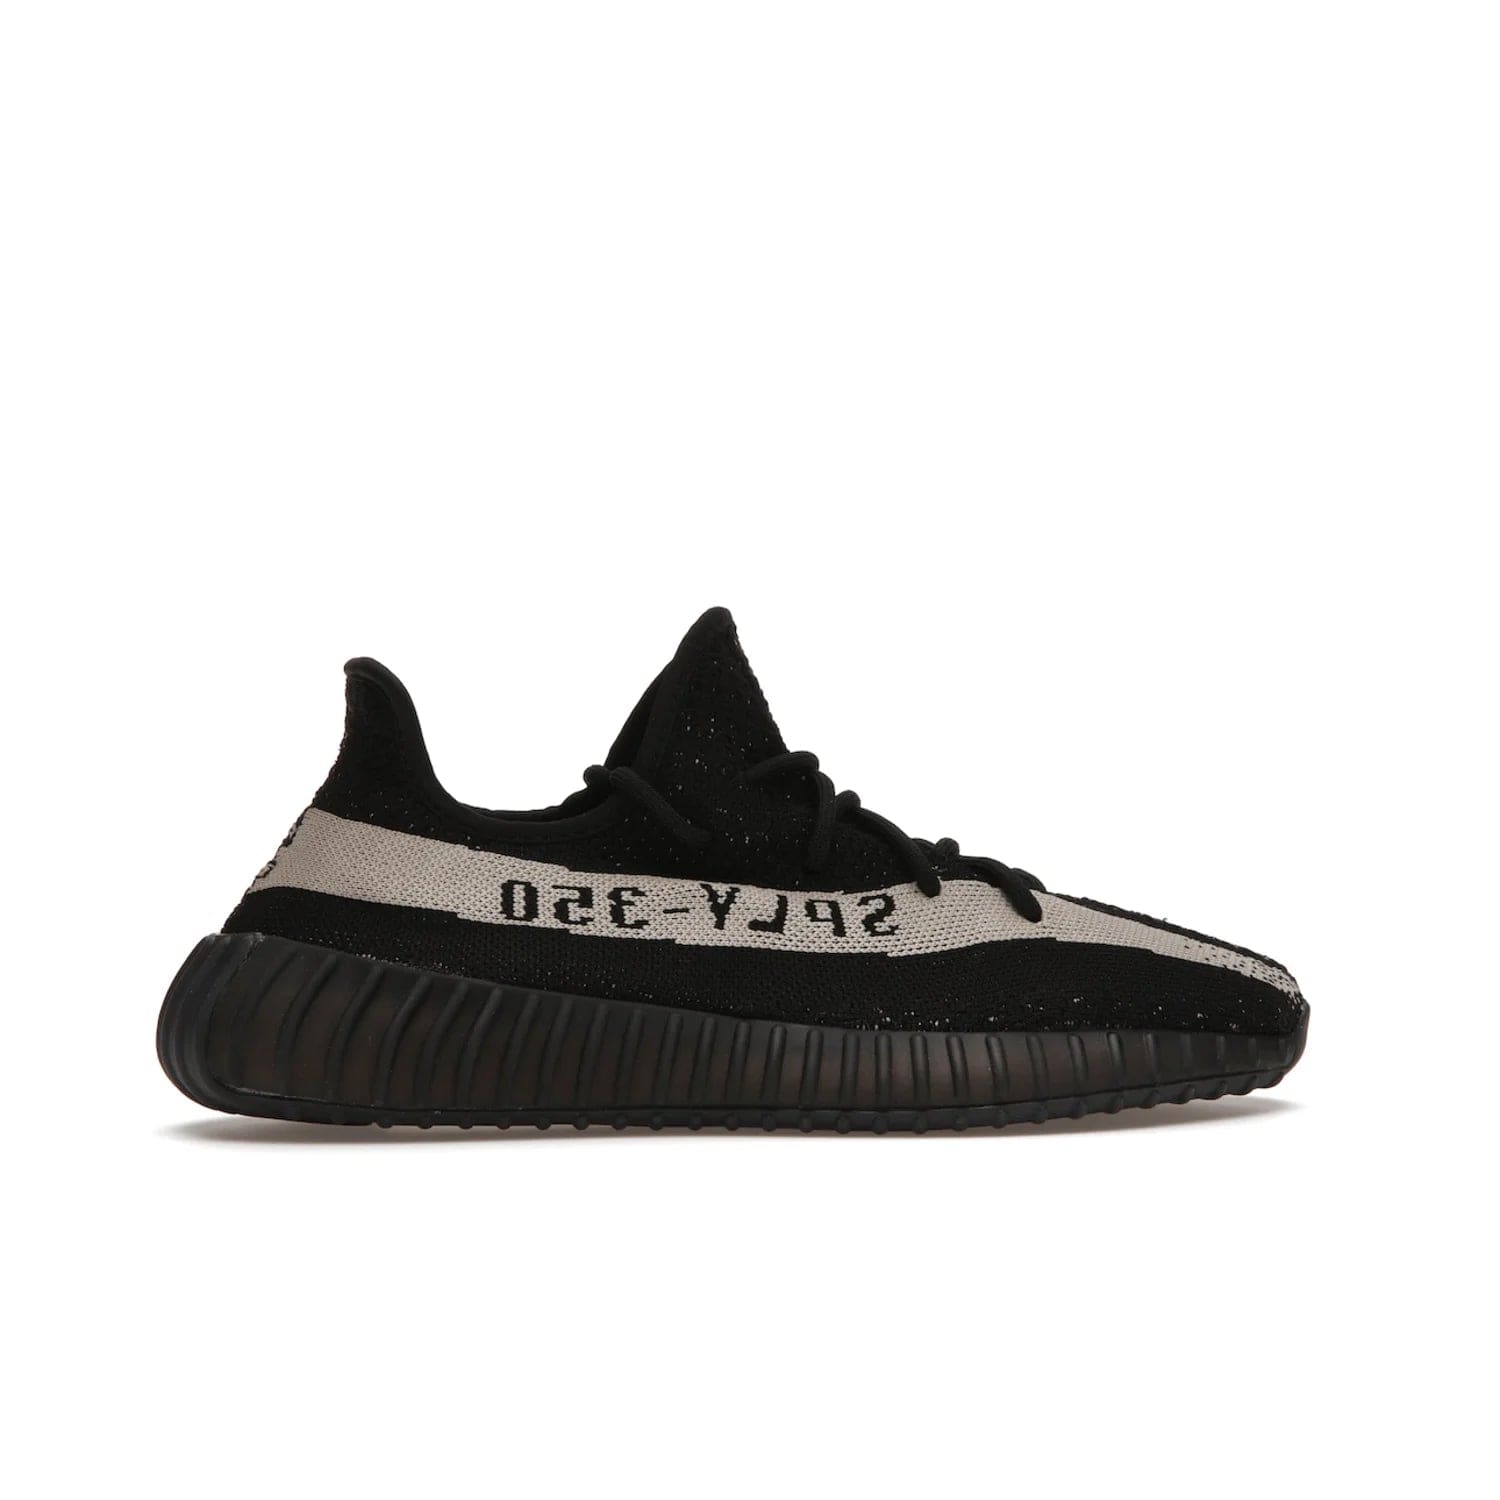 adidas Yeezy Boost 350 V2 Core Black White (2016/2022) - Image 36 - Only at www.BallersClubKickz.com - Stylish adidas Yeezy Boost 350 V2 in classic black with white "SPLY-350" stitched to the side stripe. Features Primeknit upper & Boost sole for comfort. Restock in March 2022.